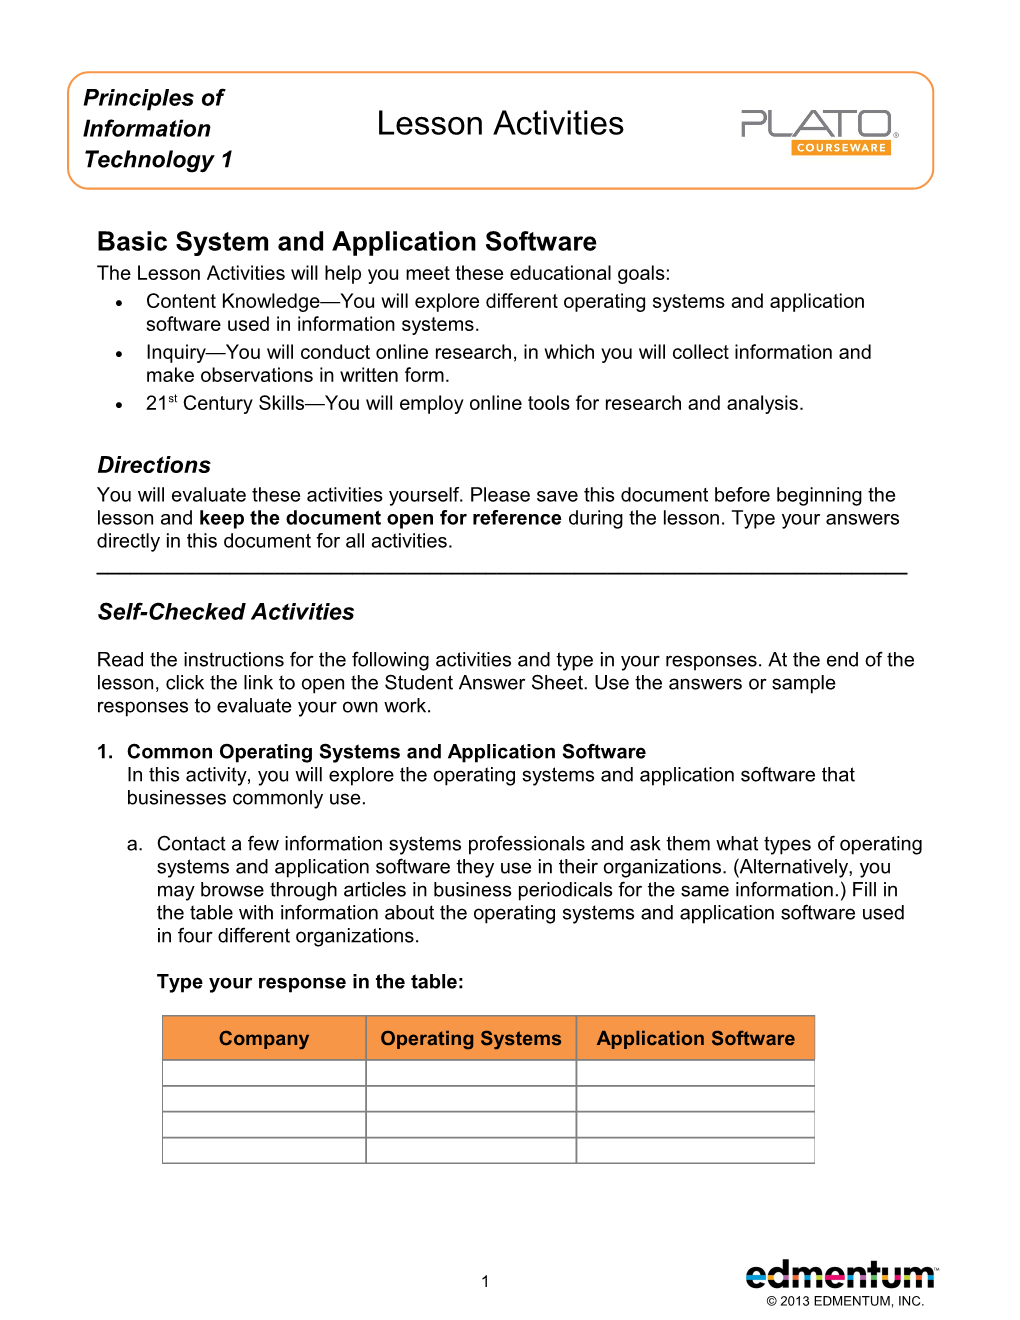 Basic System and Application Software LA